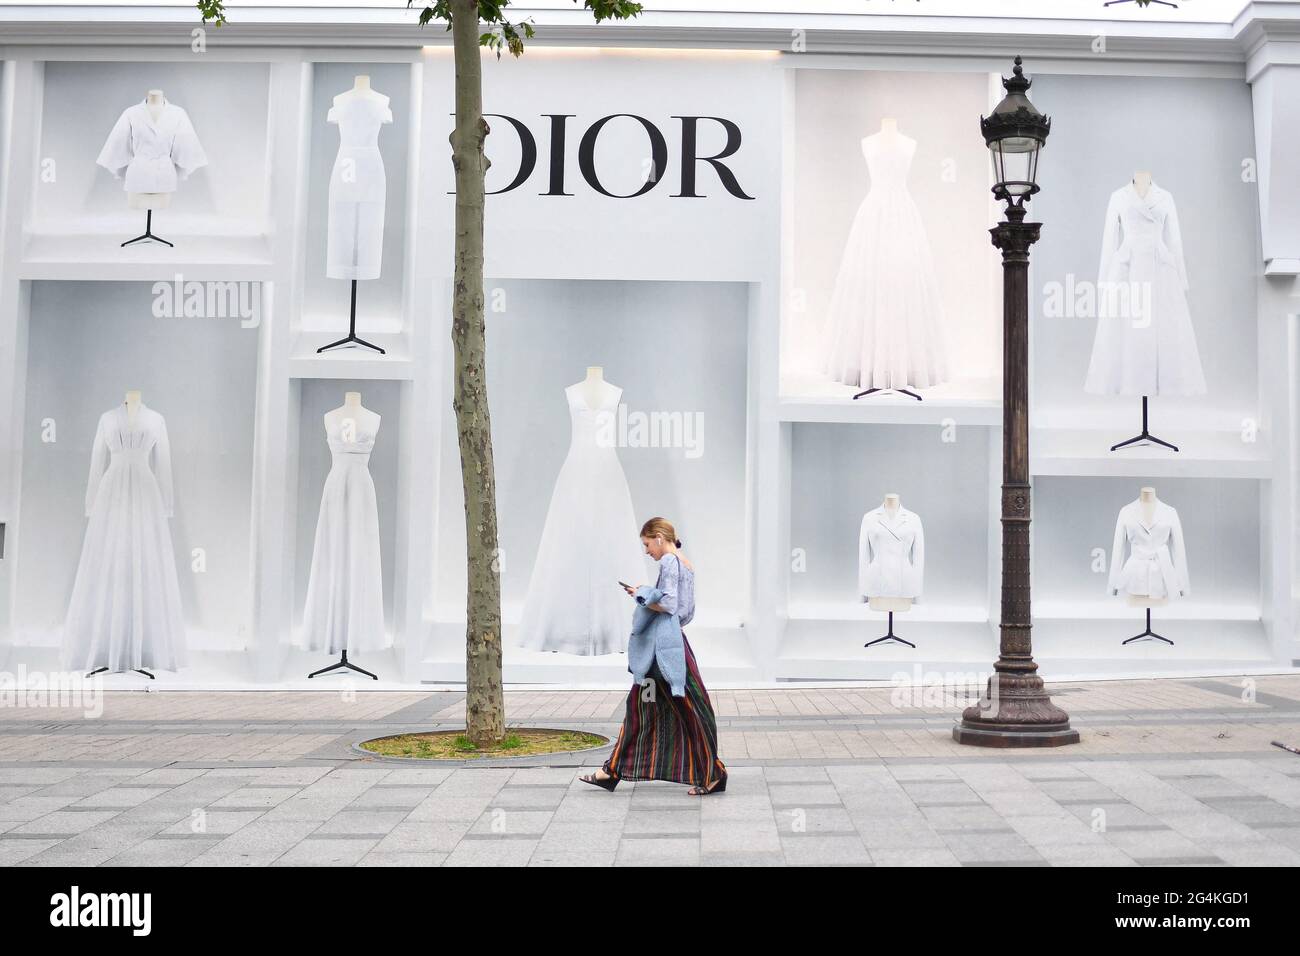 An outside view of Dior's new HQs under renovation on the Champs